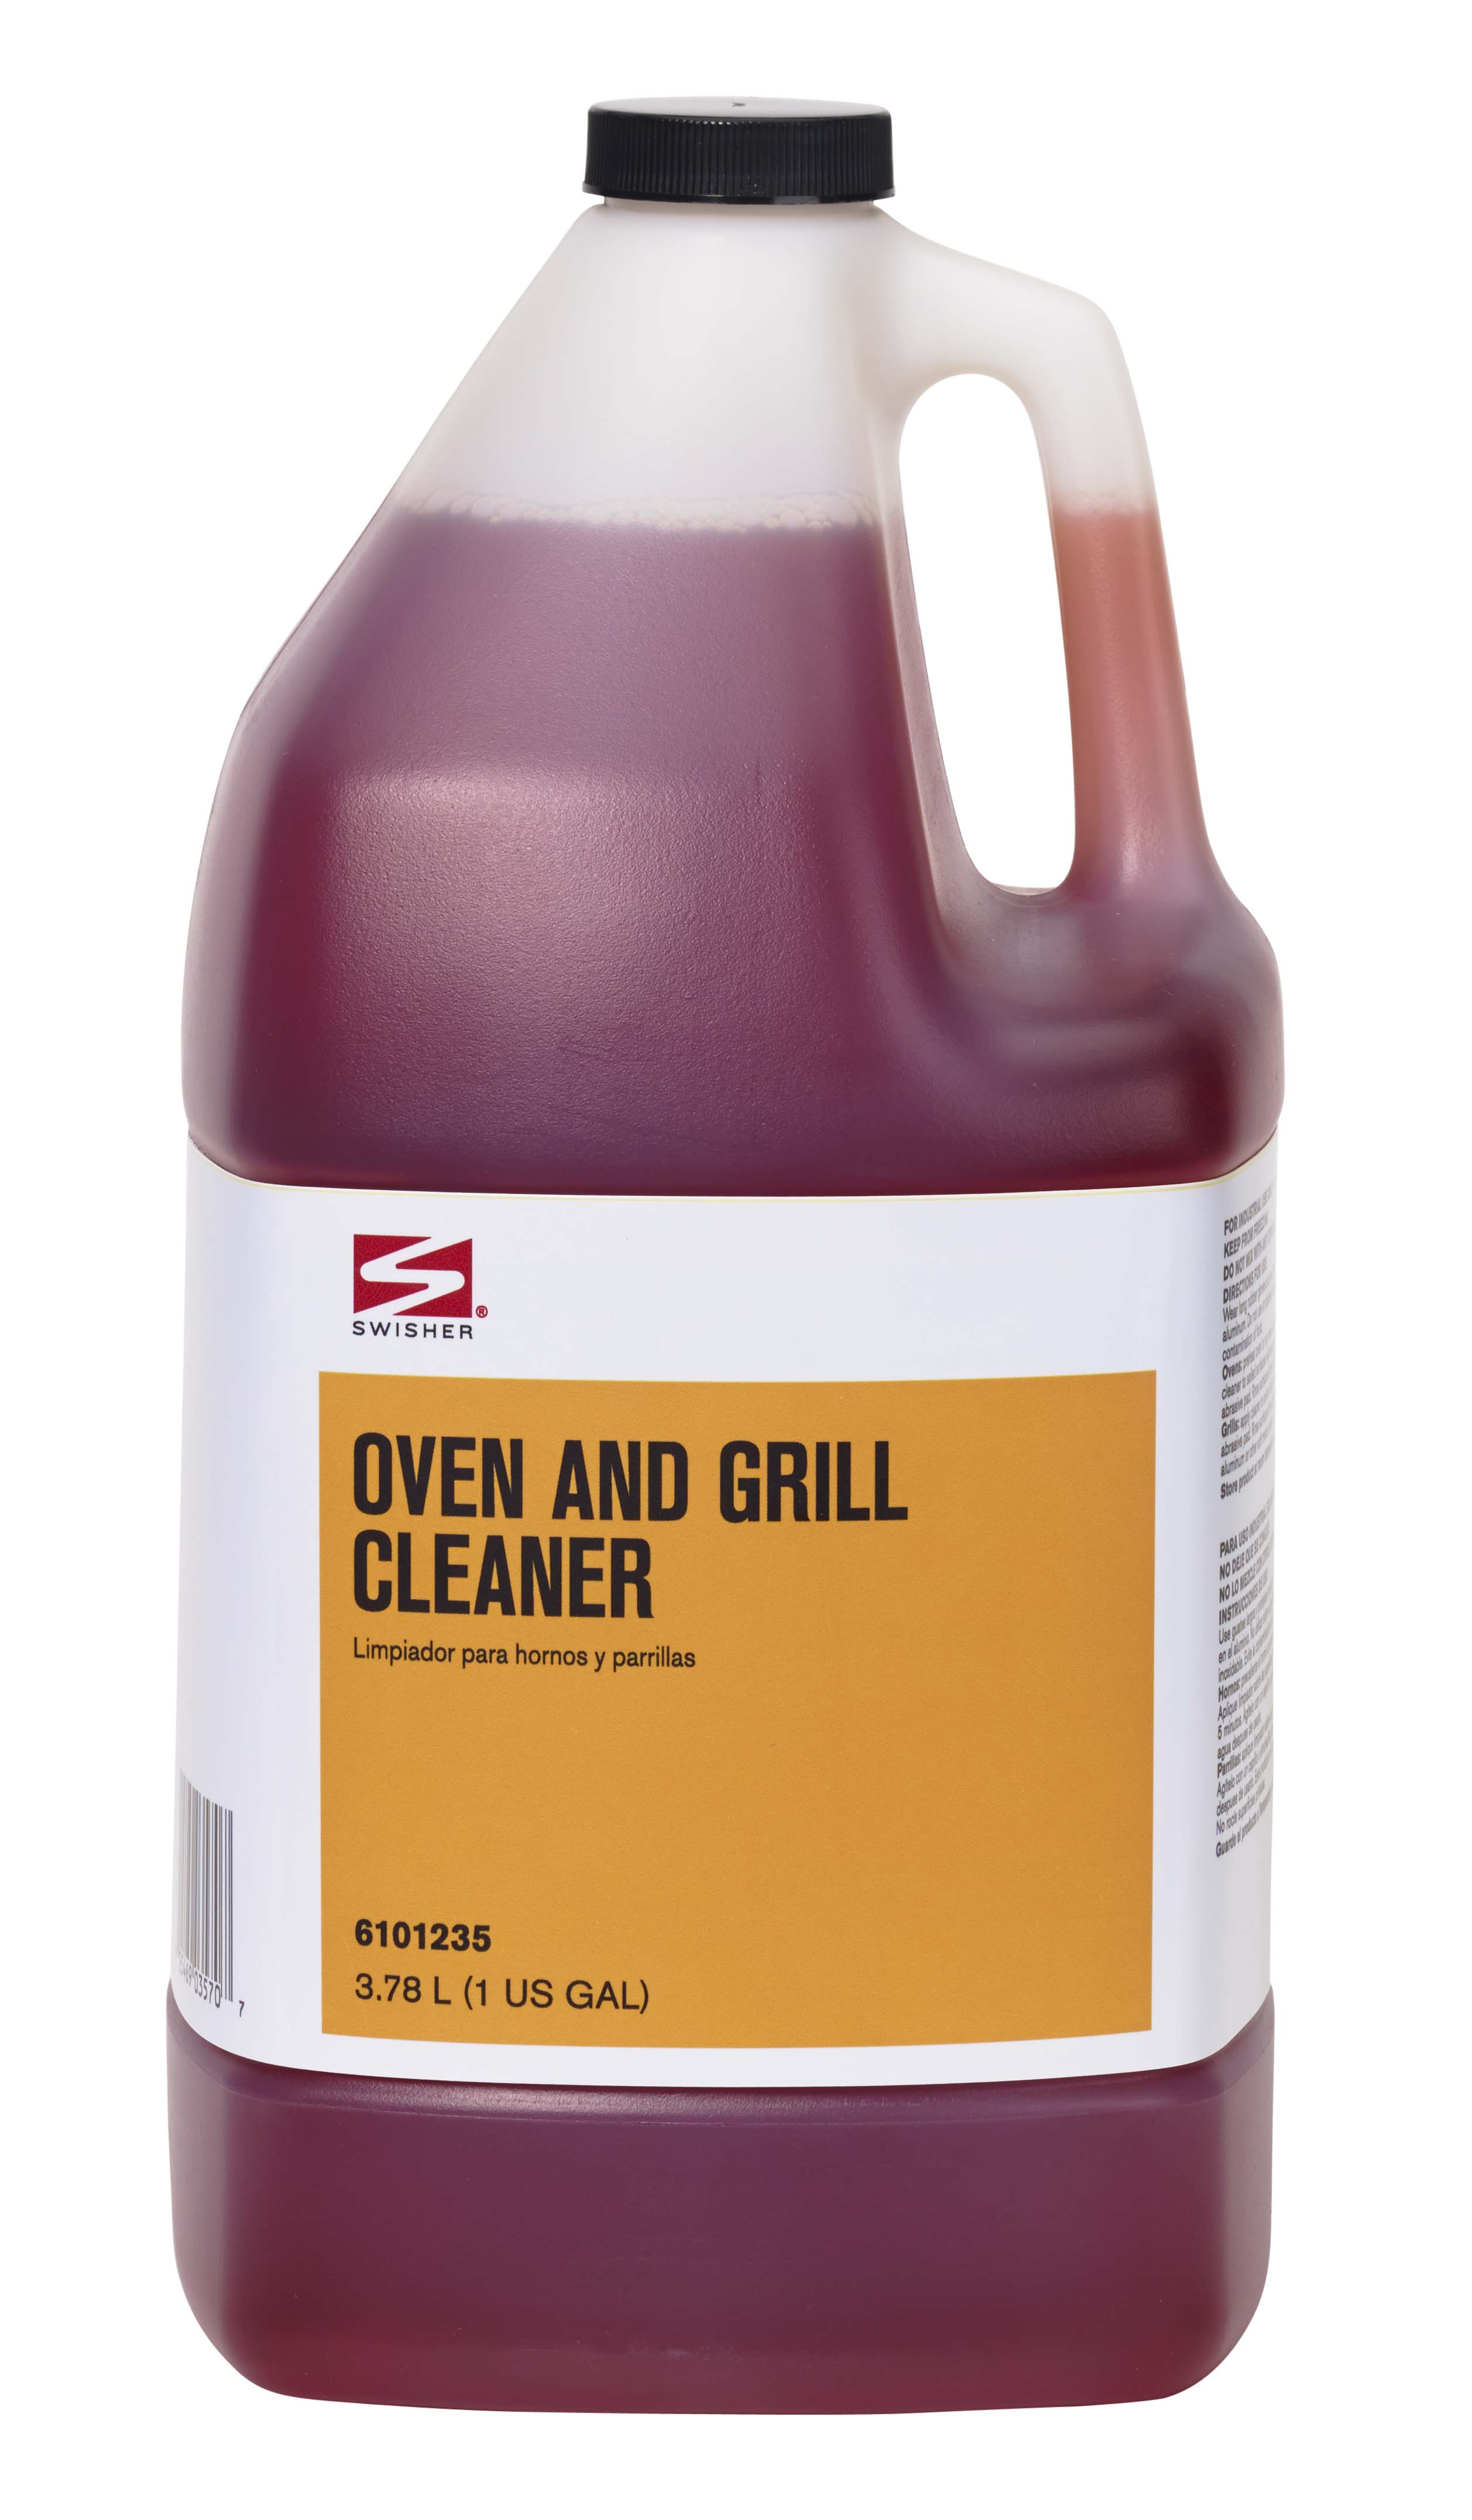 https://www.swsh.com/-/media/Swisher/Images/ProductImages/Swisher-Oven-and-Grill-Cleaner/6101235_SW_OvenGrill_Cleaner_1Gal.ashx